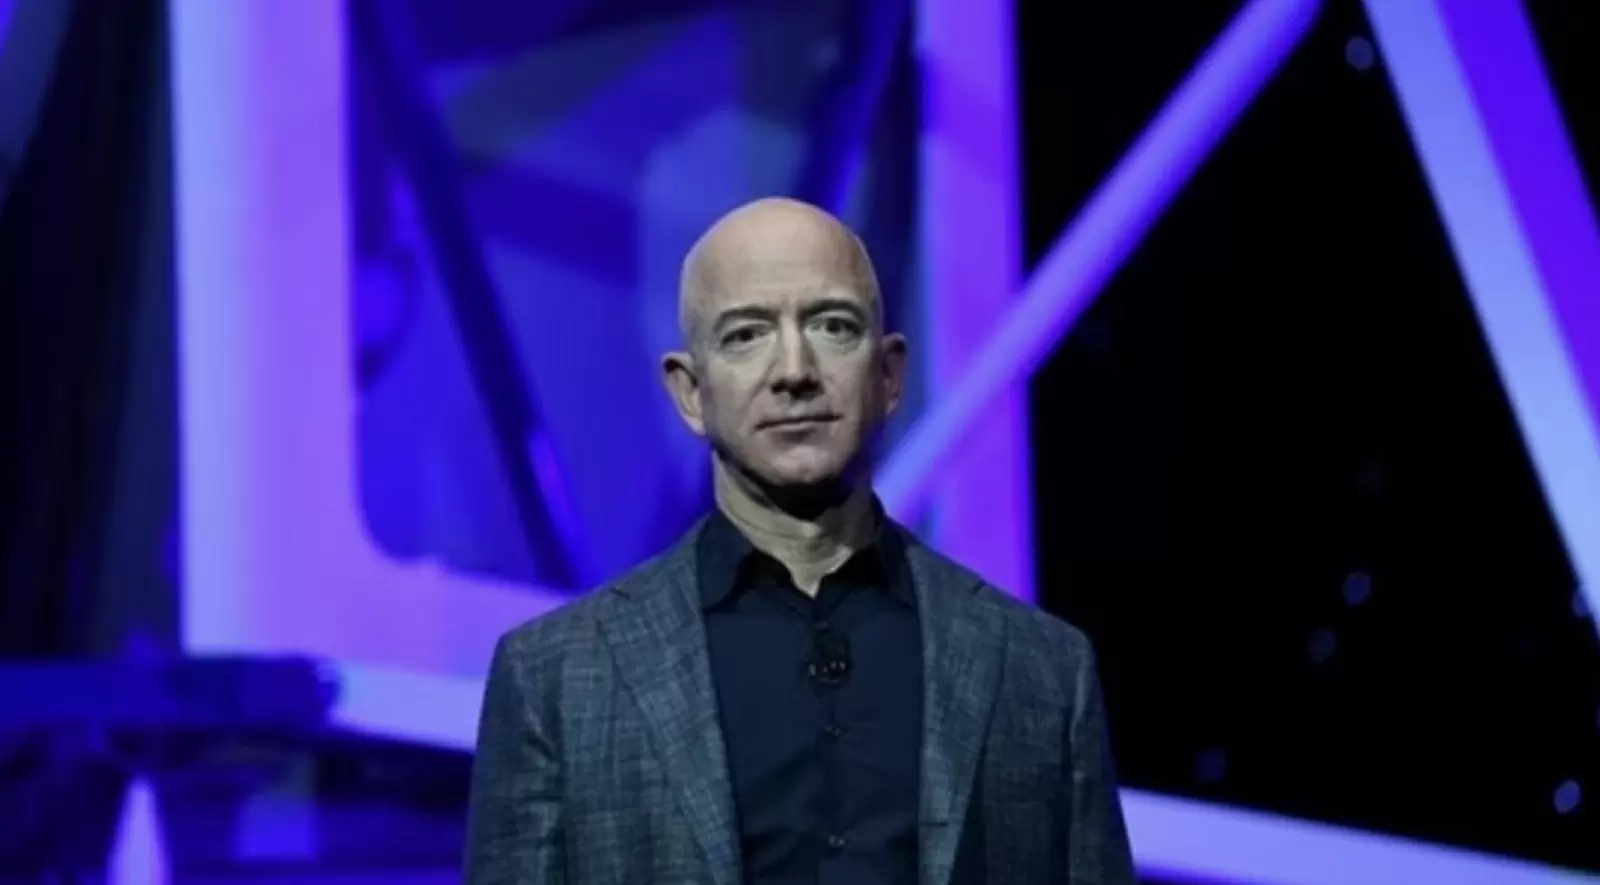 Jeff Bezos will sell 50 million shares of Amazon in the next 12 months, know complete details here